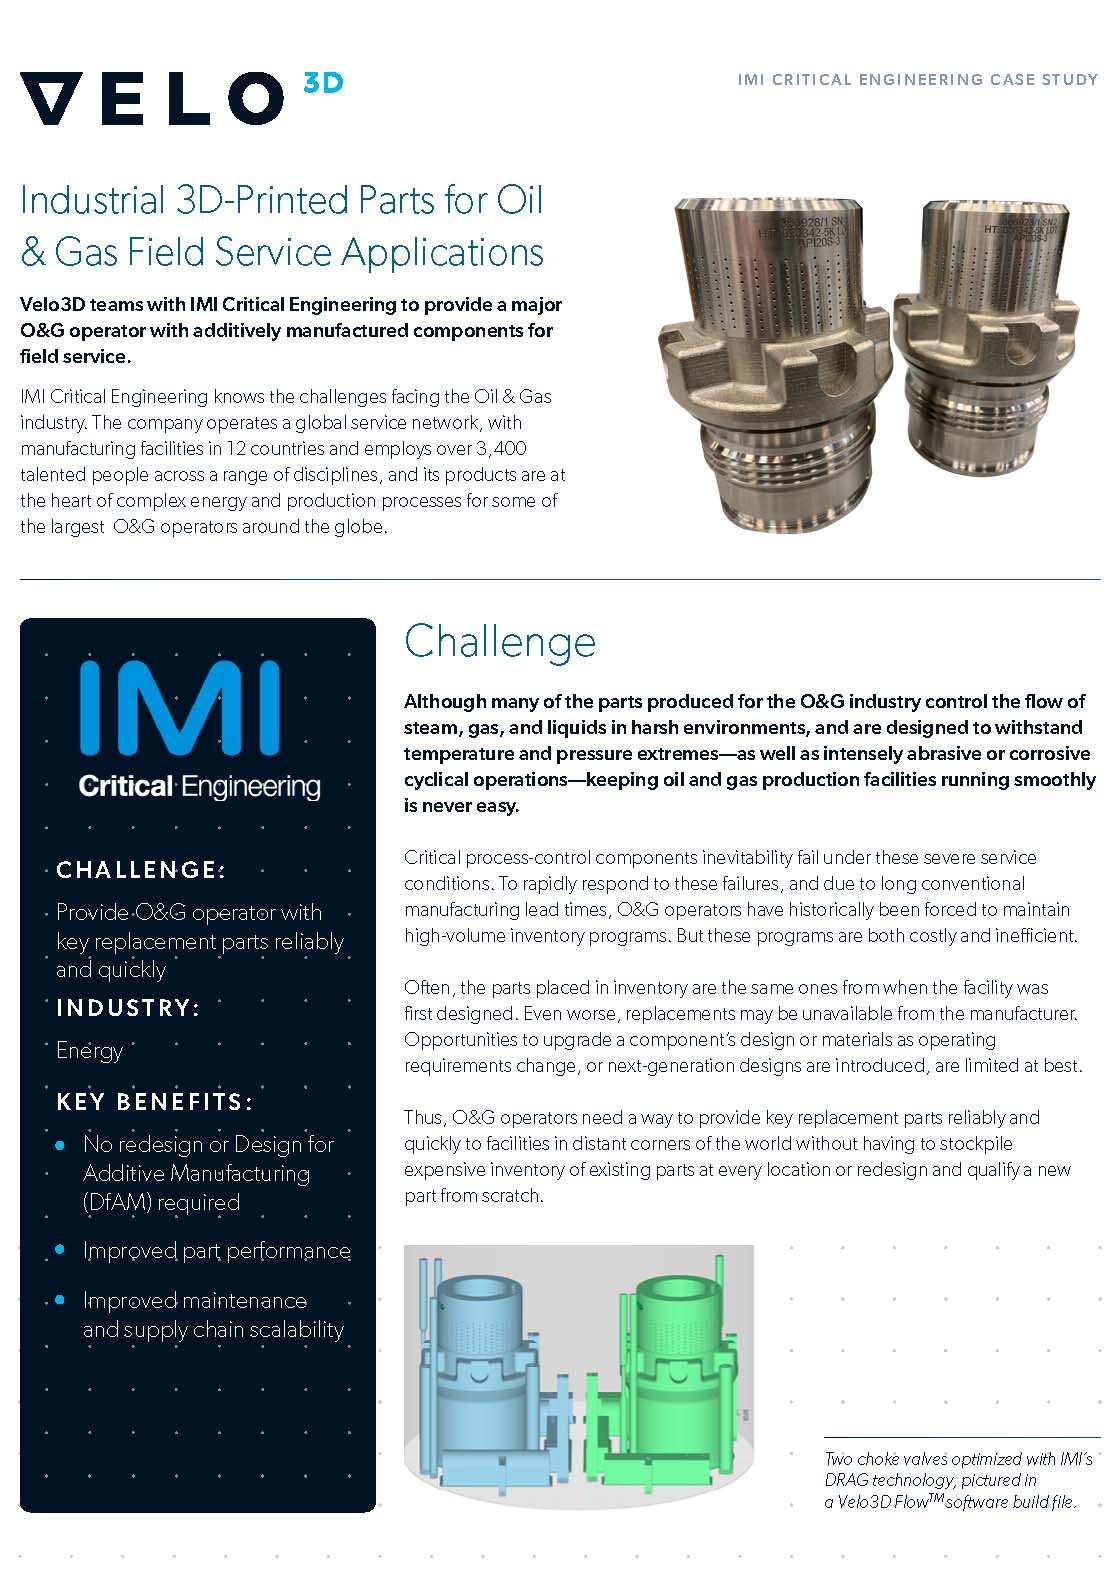 Industrial 3D-Printed Parts for Oil & Gas Field Service Applications